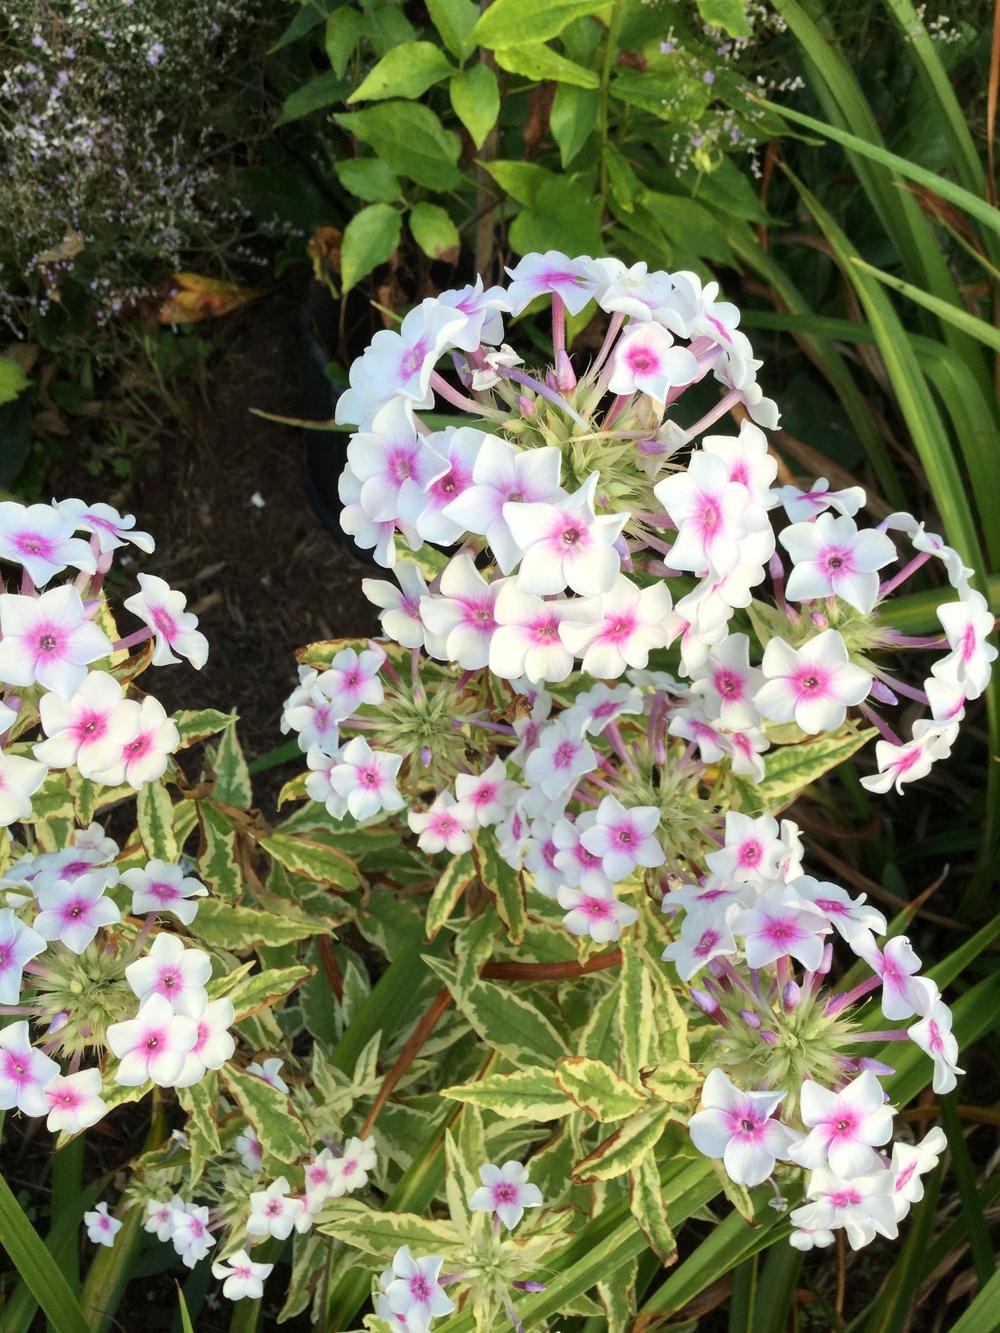 Photo of Variegated Garden Phlox (Phlox paniculata 'Nora Leigh') uploaded by Lucichar